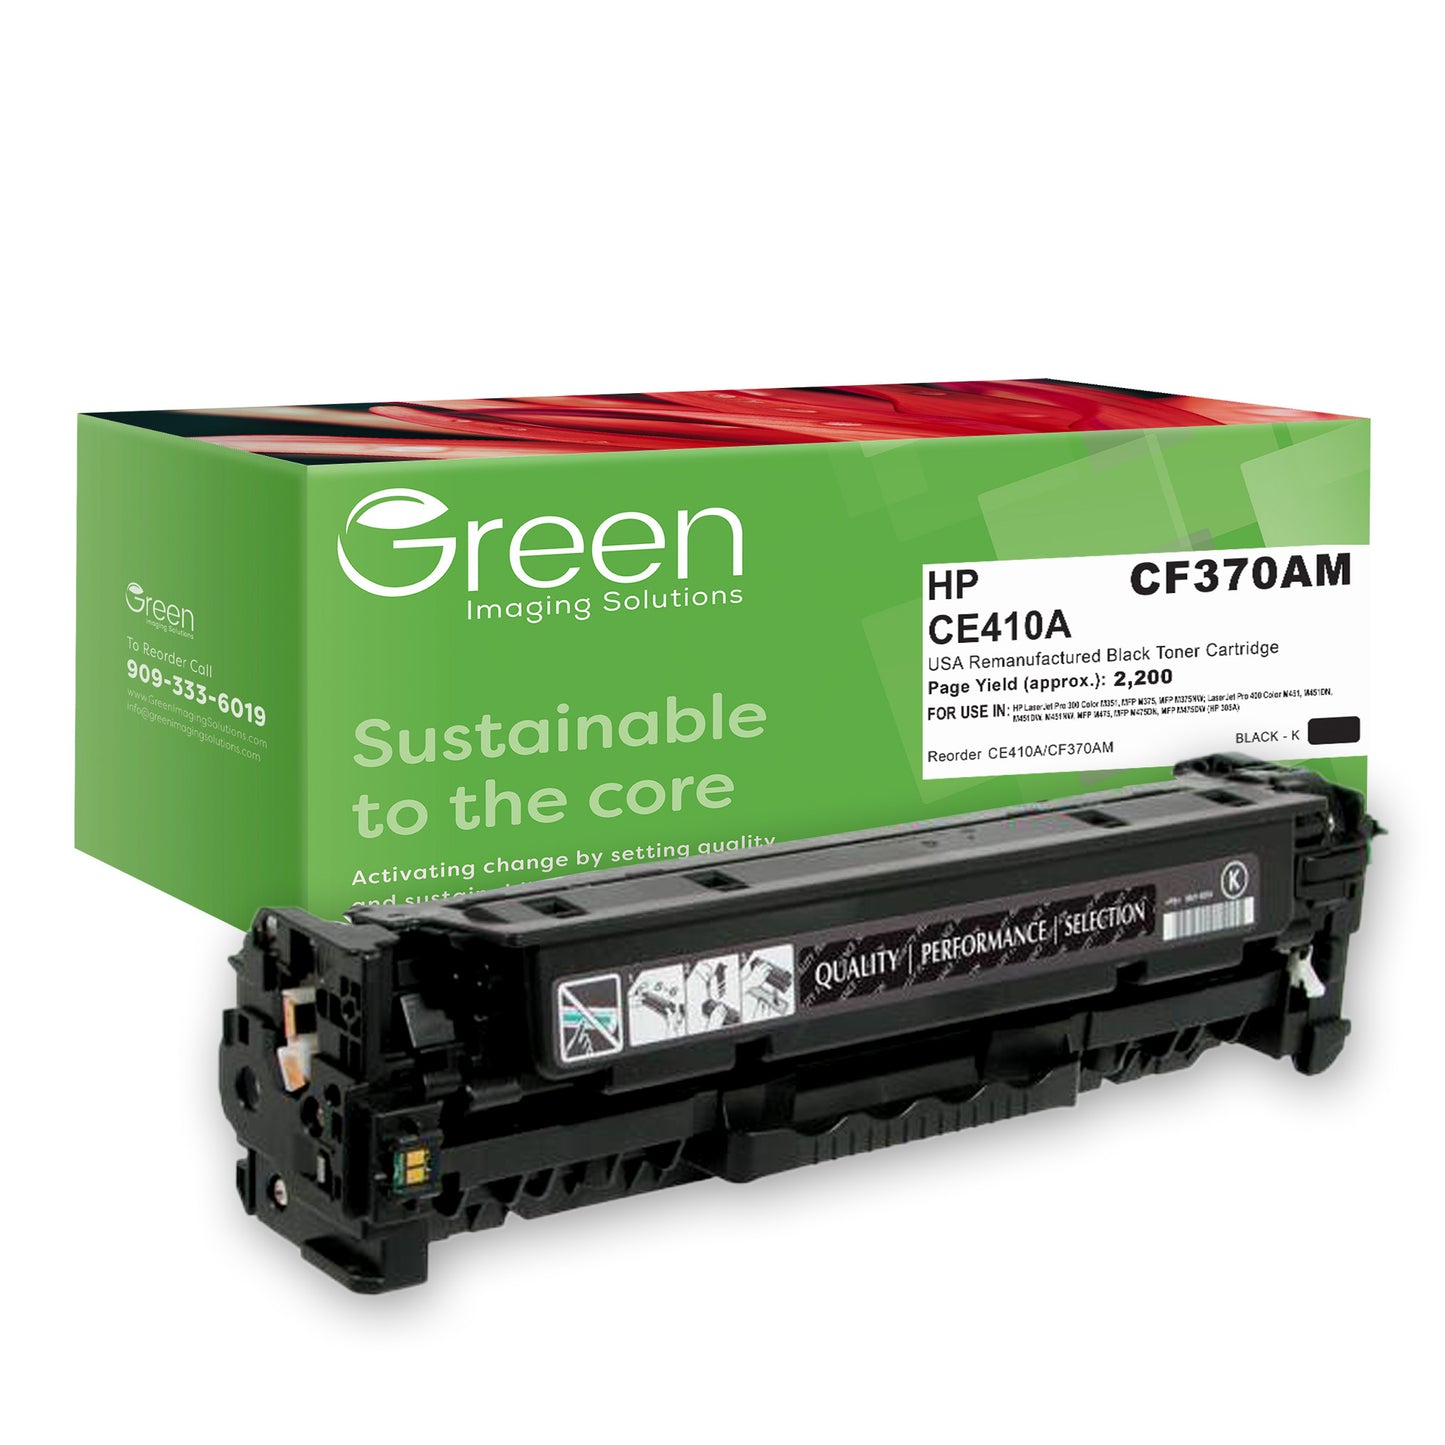 GIS USA Remanufactured Black Toner Cartridge for HP CE410A (HP 305A)